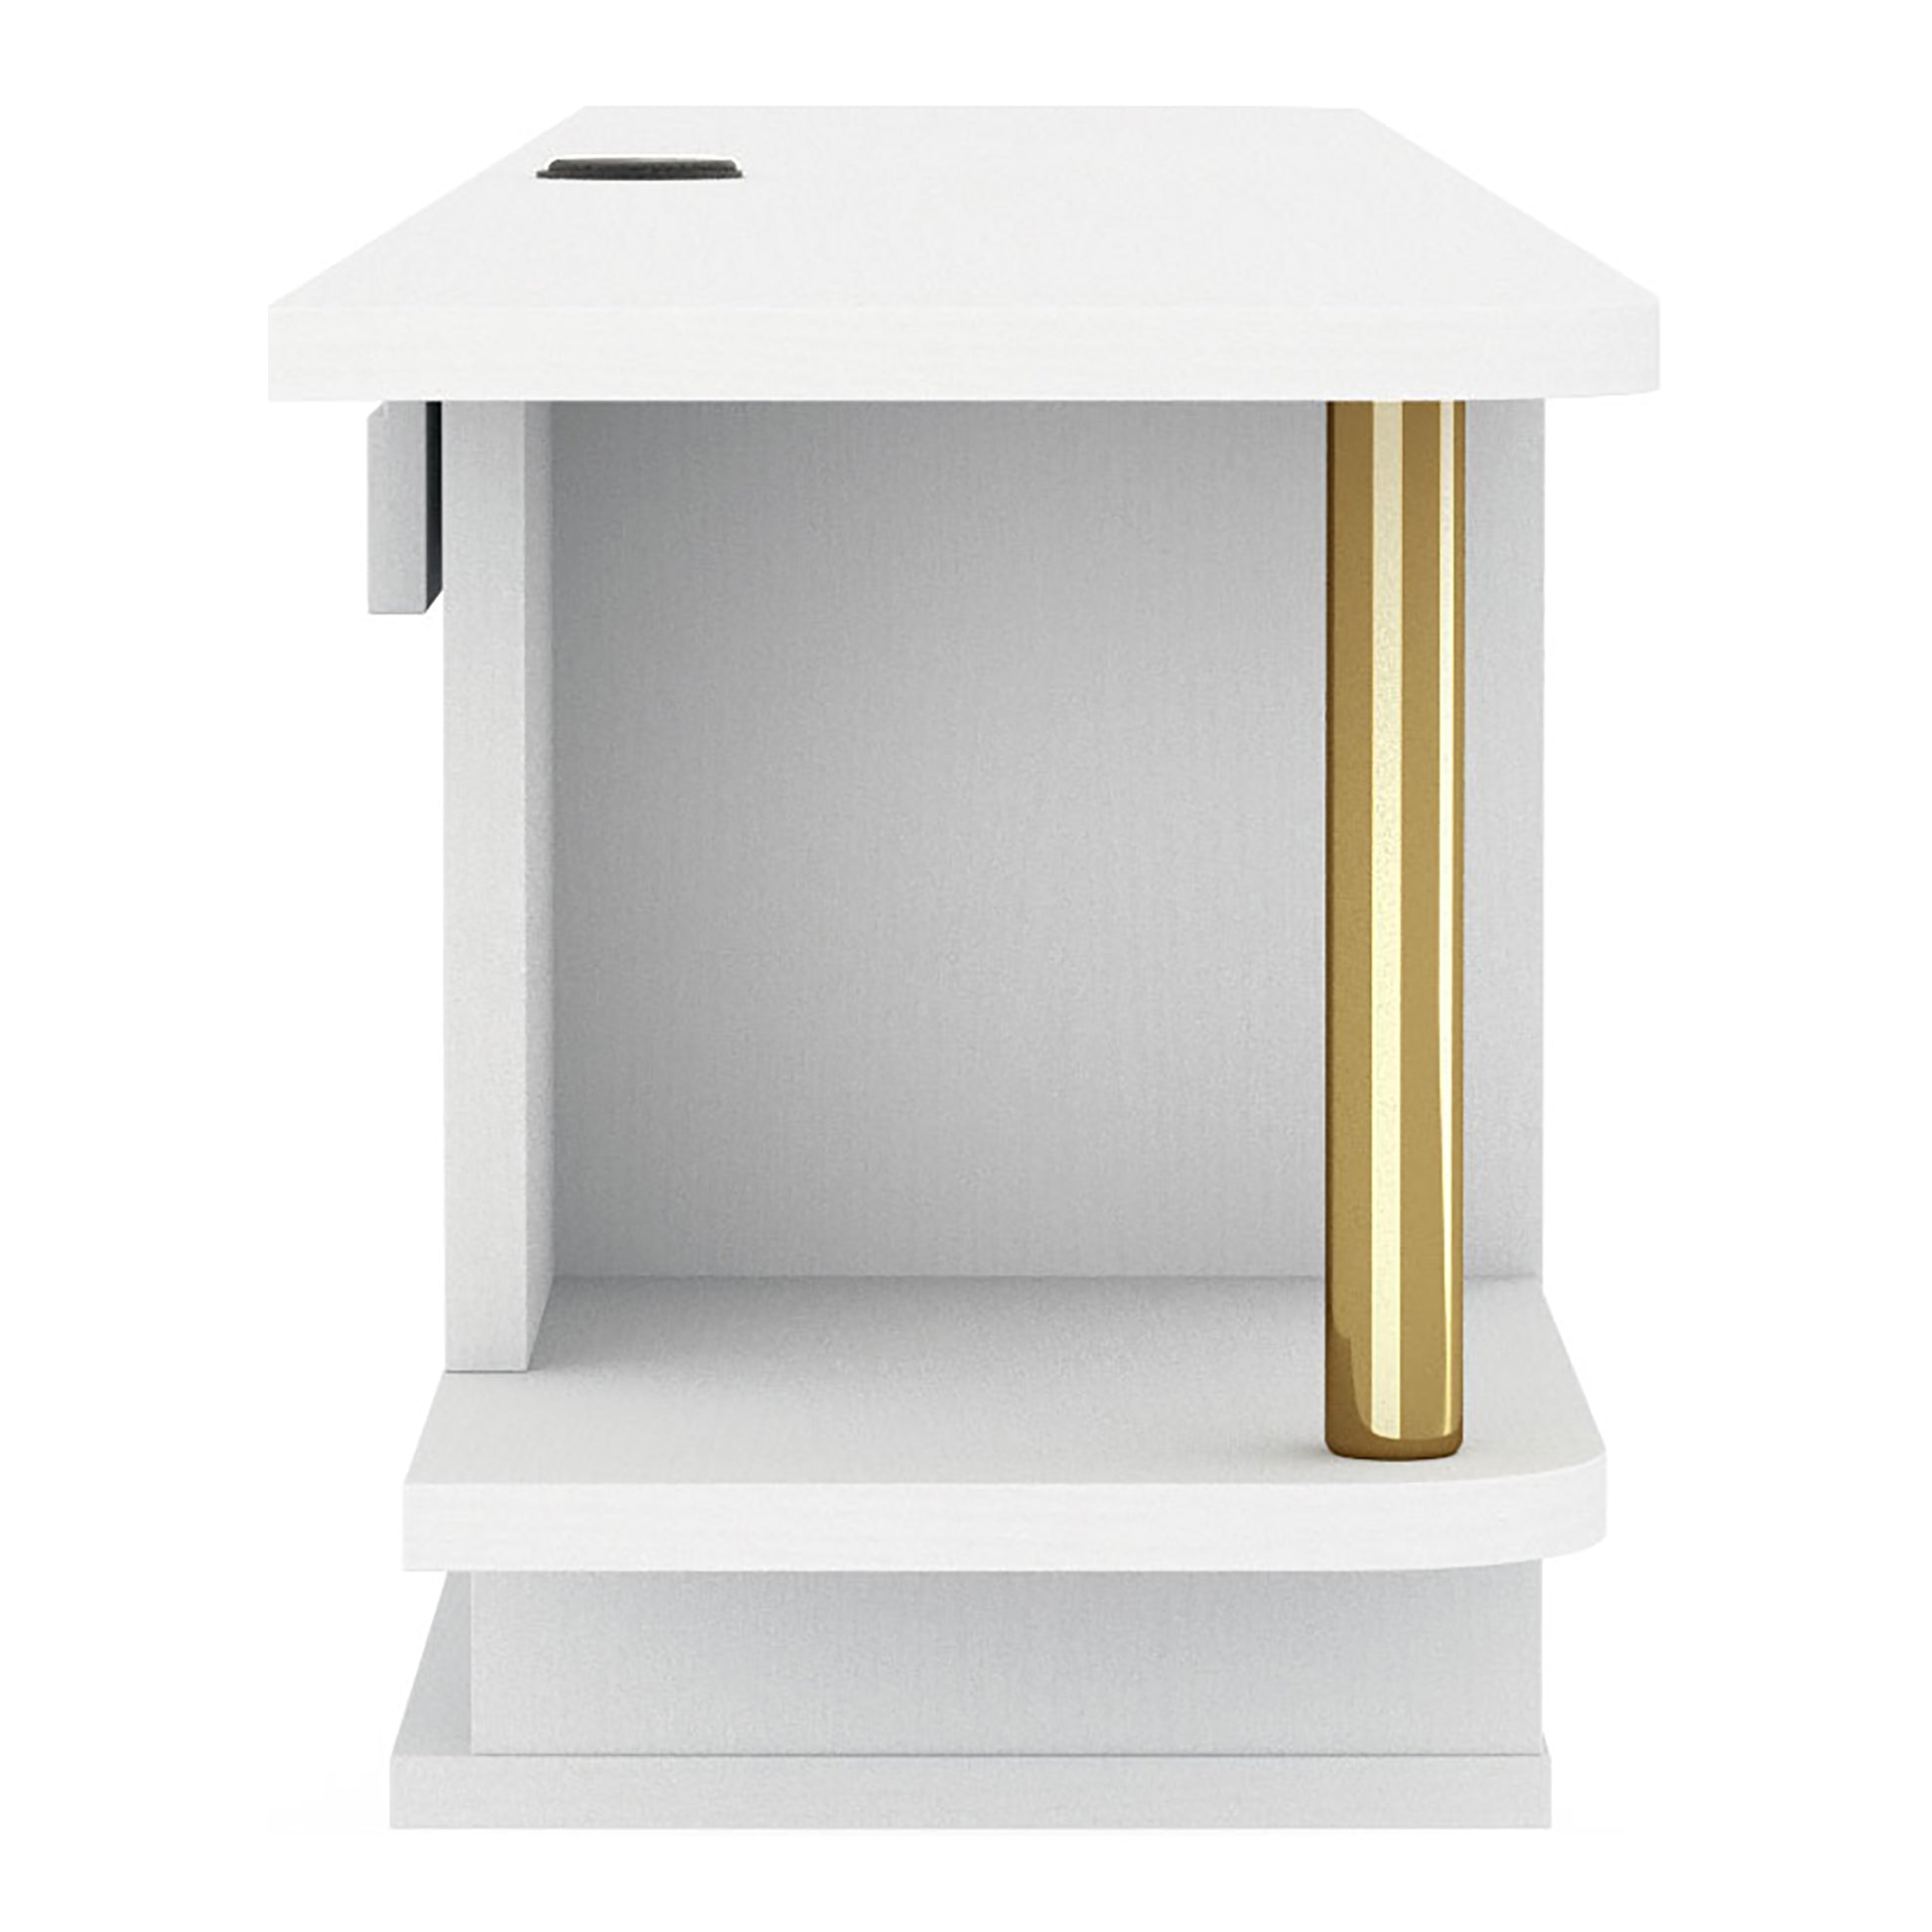 Front-facing side view of a modern white and gold three-shelf floating TV stand on a white background